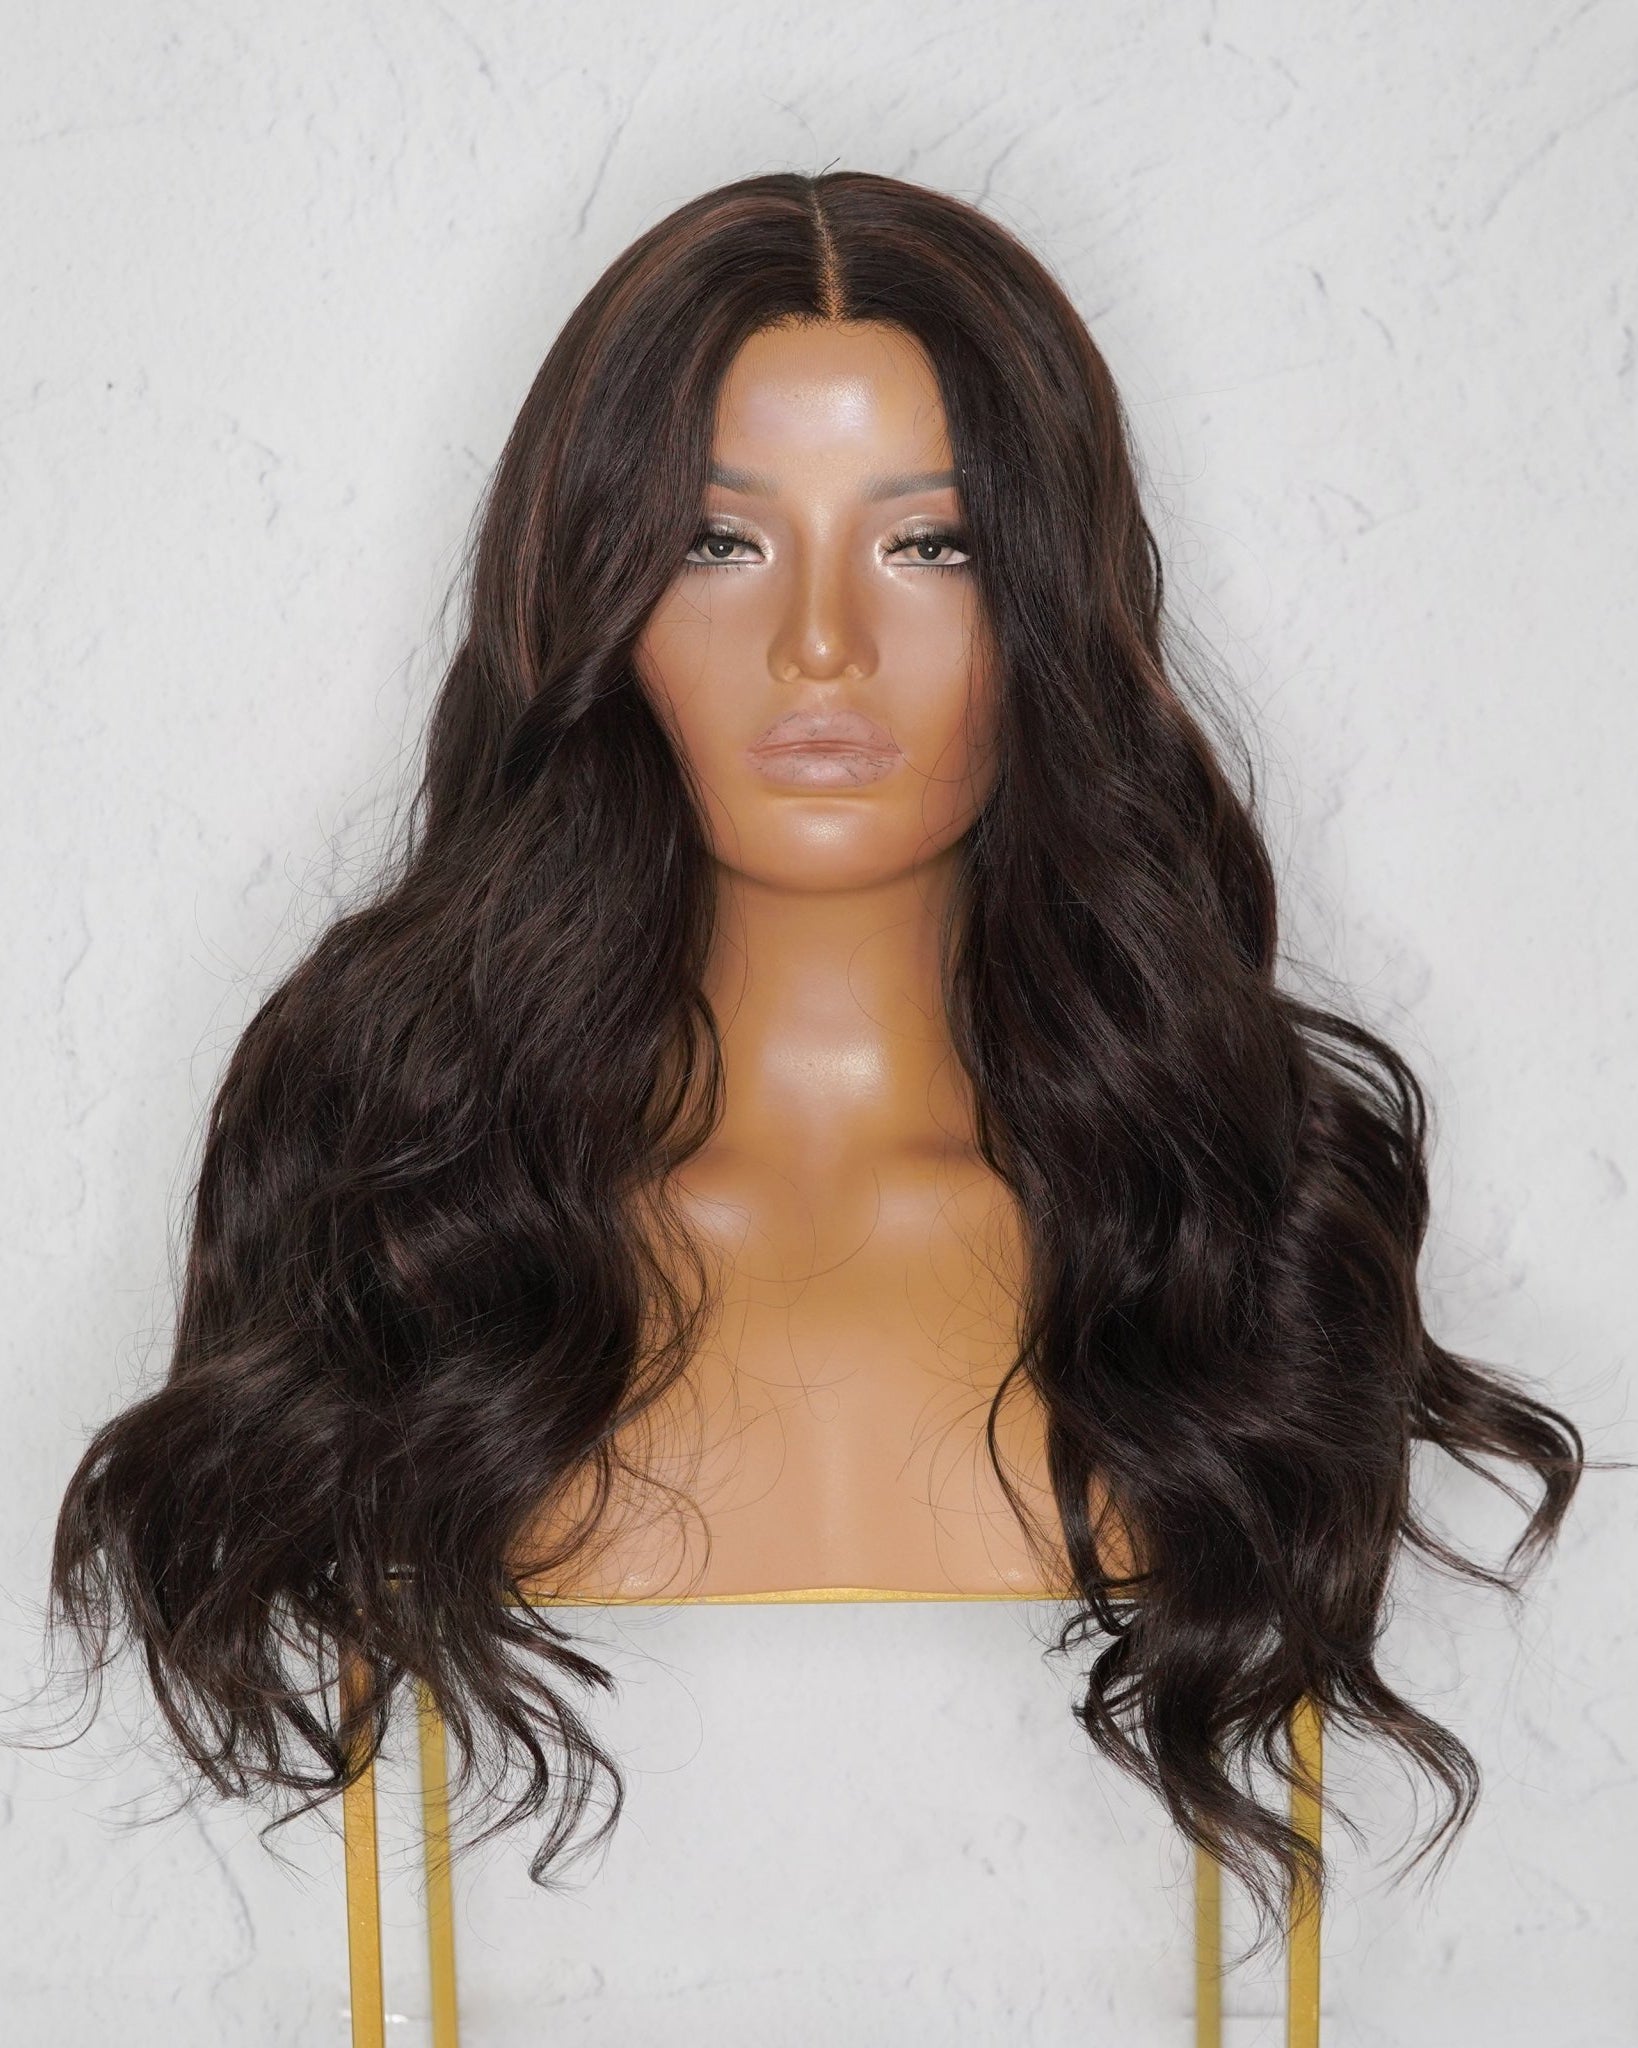 TABITHA Chocolate Lace Front Wig - Milk & Honey